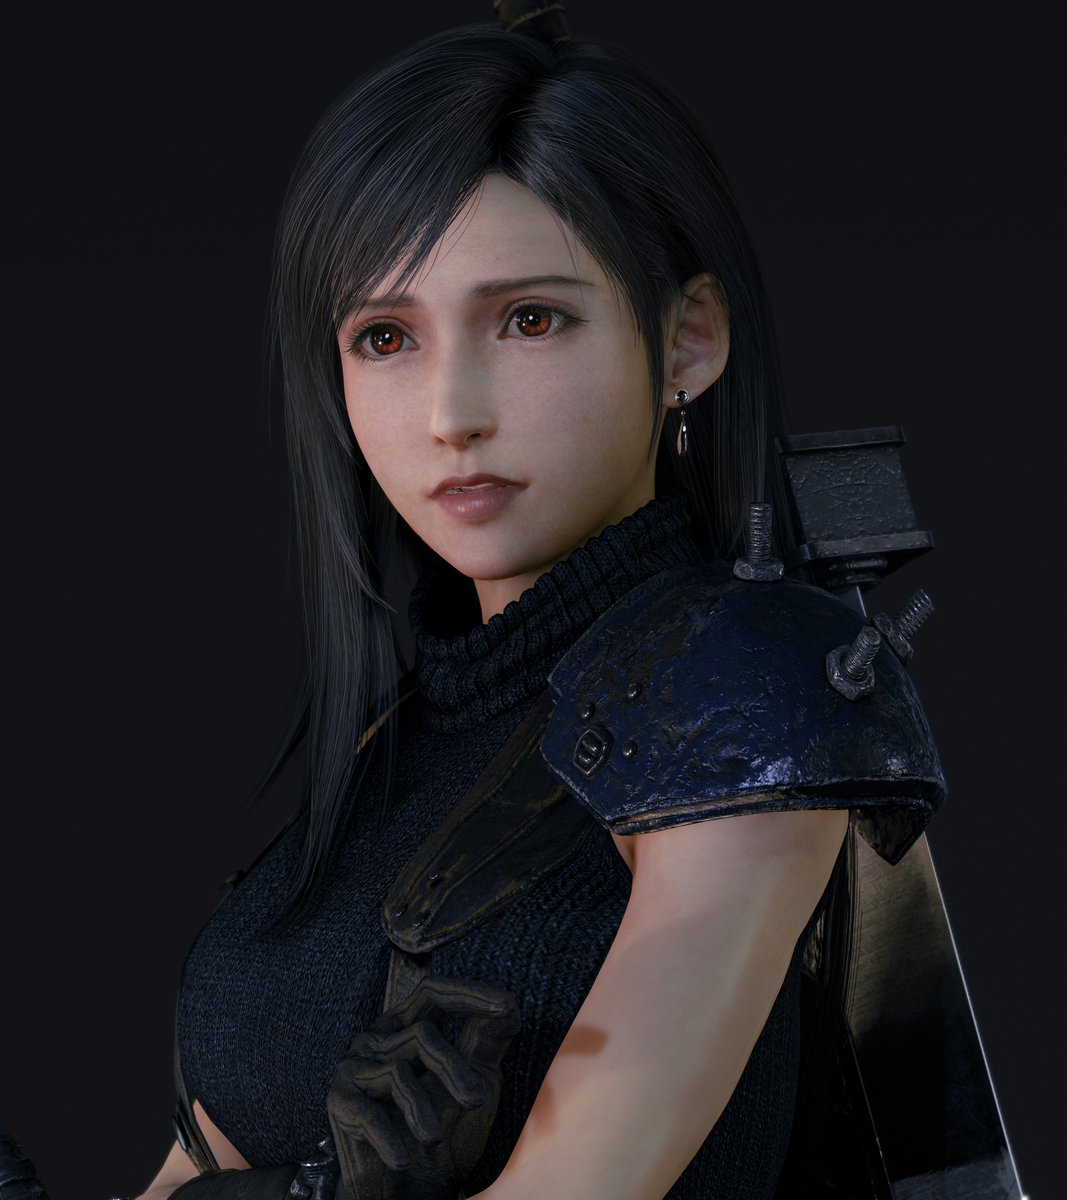 soldier tifa is everything